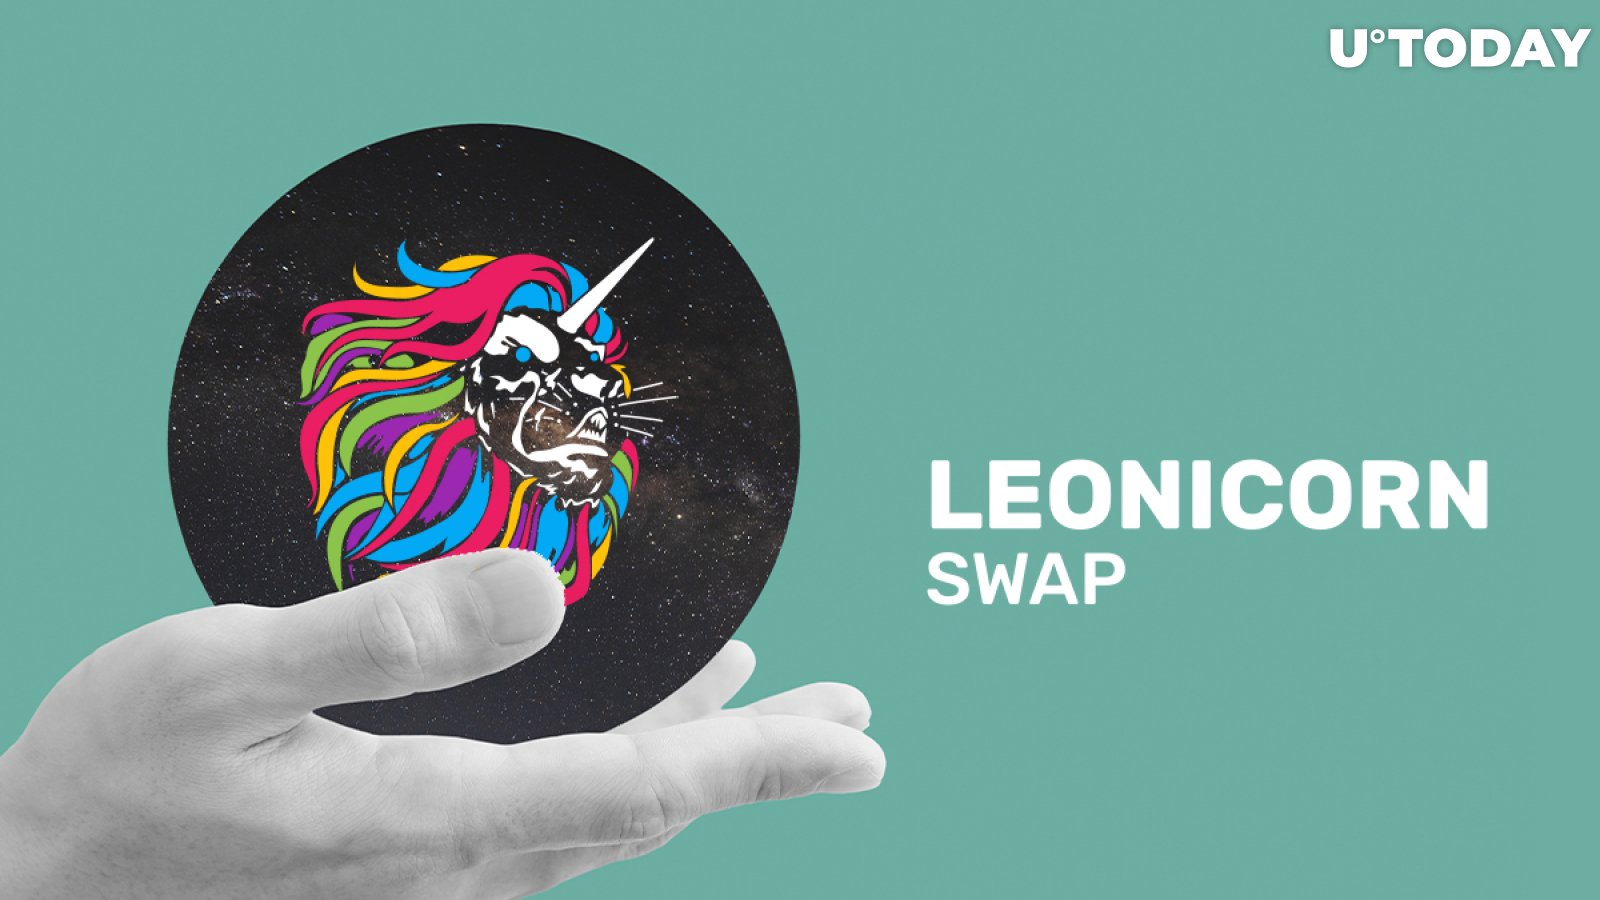 Leonicorn Swap (LEOS), First-Ever Multi-Purpose AMM, Builds All-in-One DeFi Ecosystem